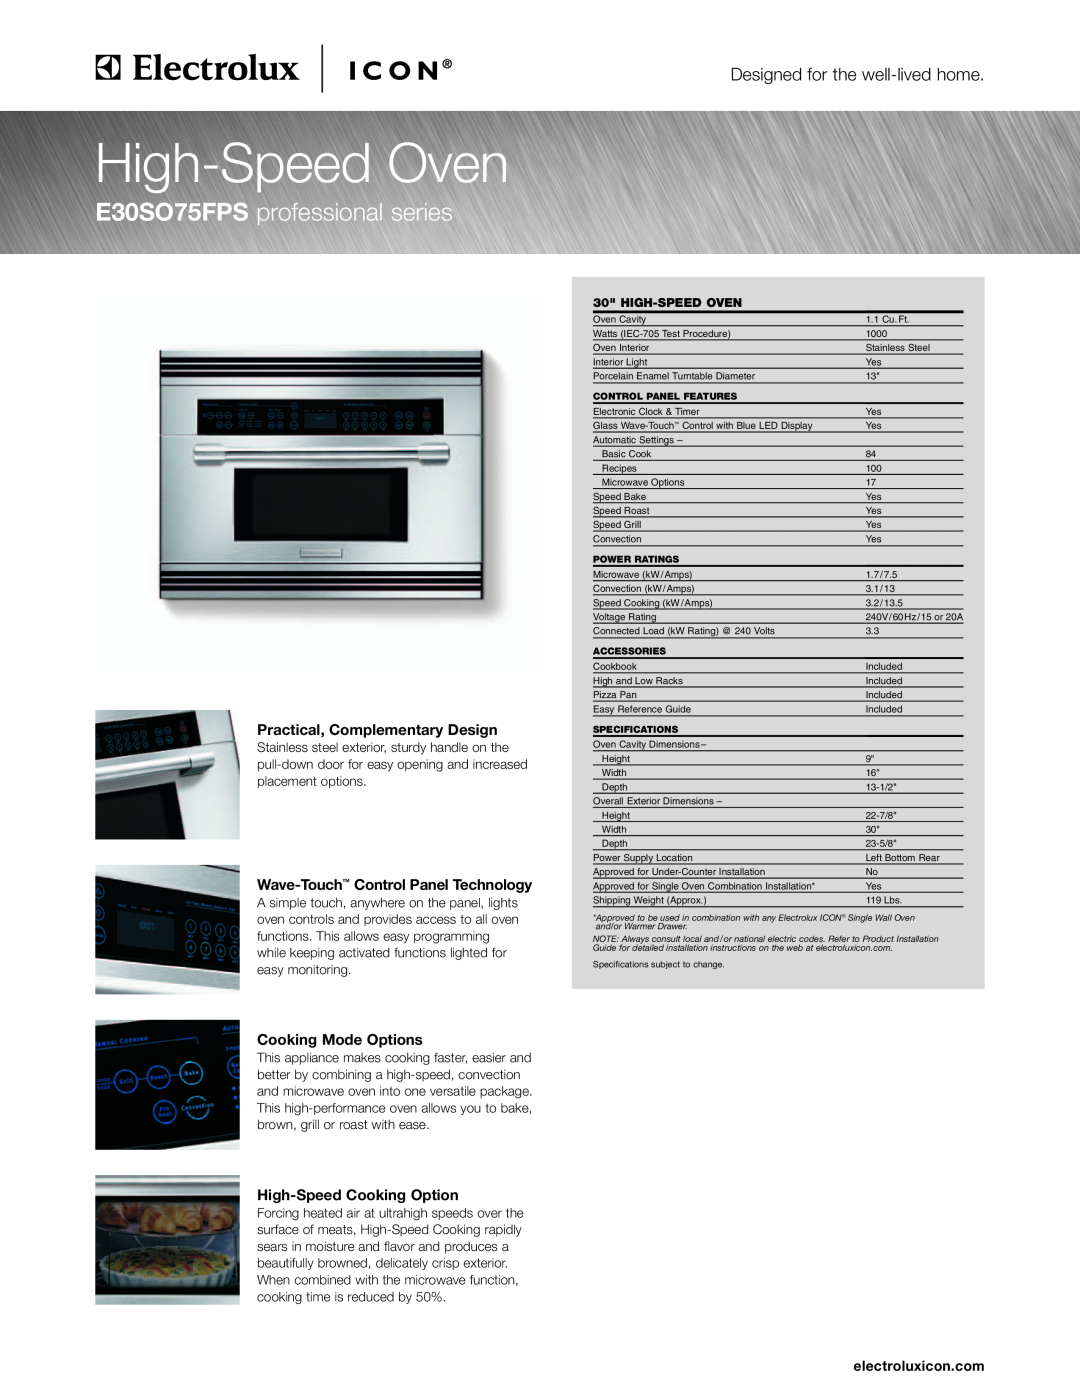 Electrolux specifications E30SO75FPS professional series, Practical, Complementary Design, Cooking Mode Options 